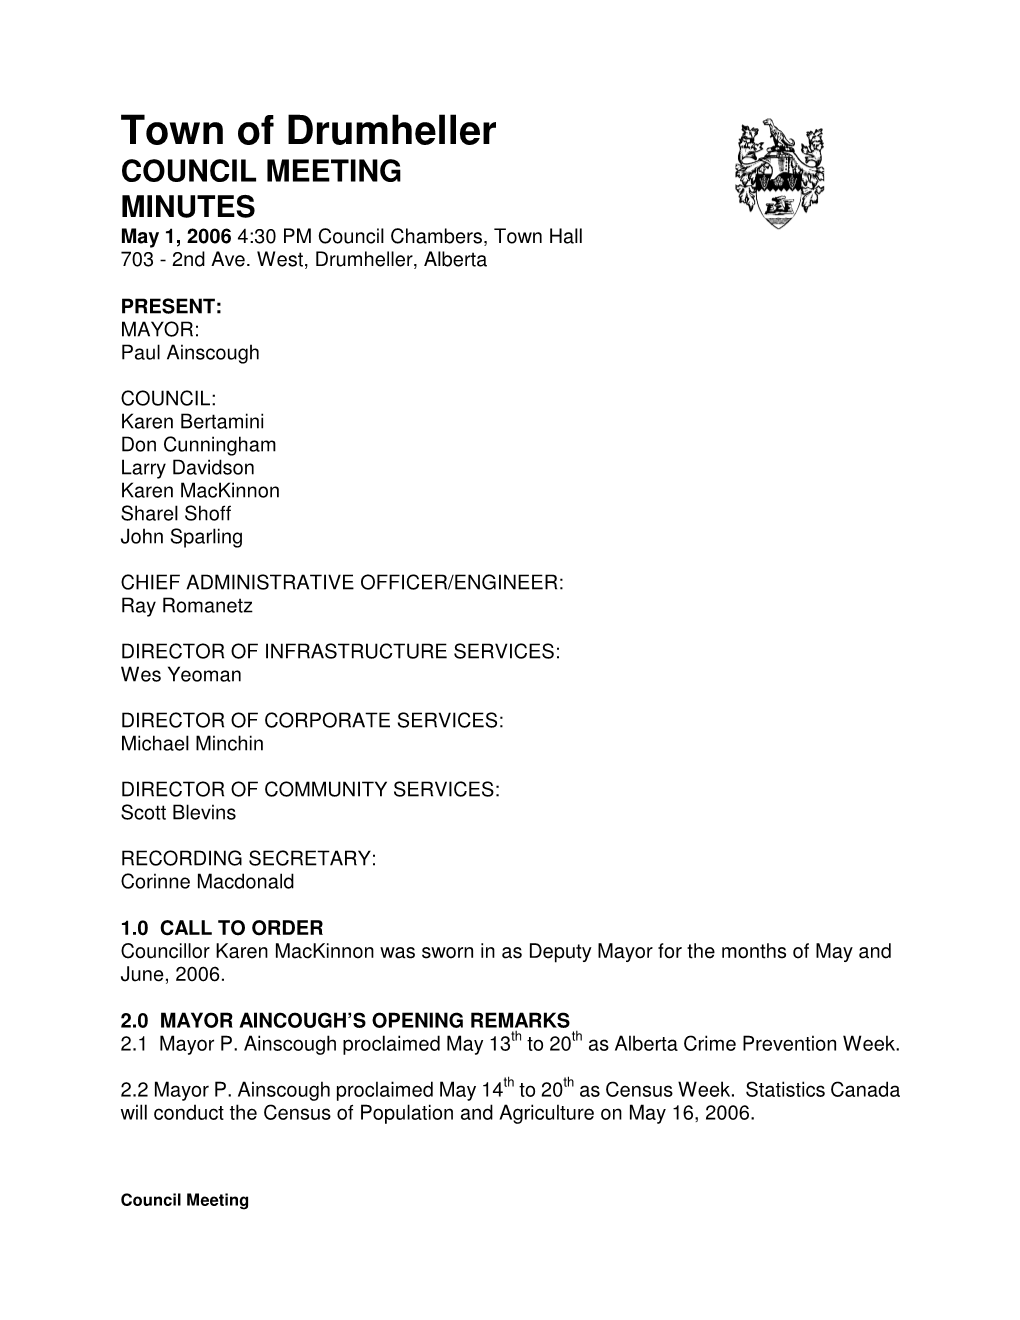 Town of Drumheller COUNCIL MEETING MINUTES May 1, 2006 4:30 PM Council Chambers, Town Hall 703 - 2Nd Ave